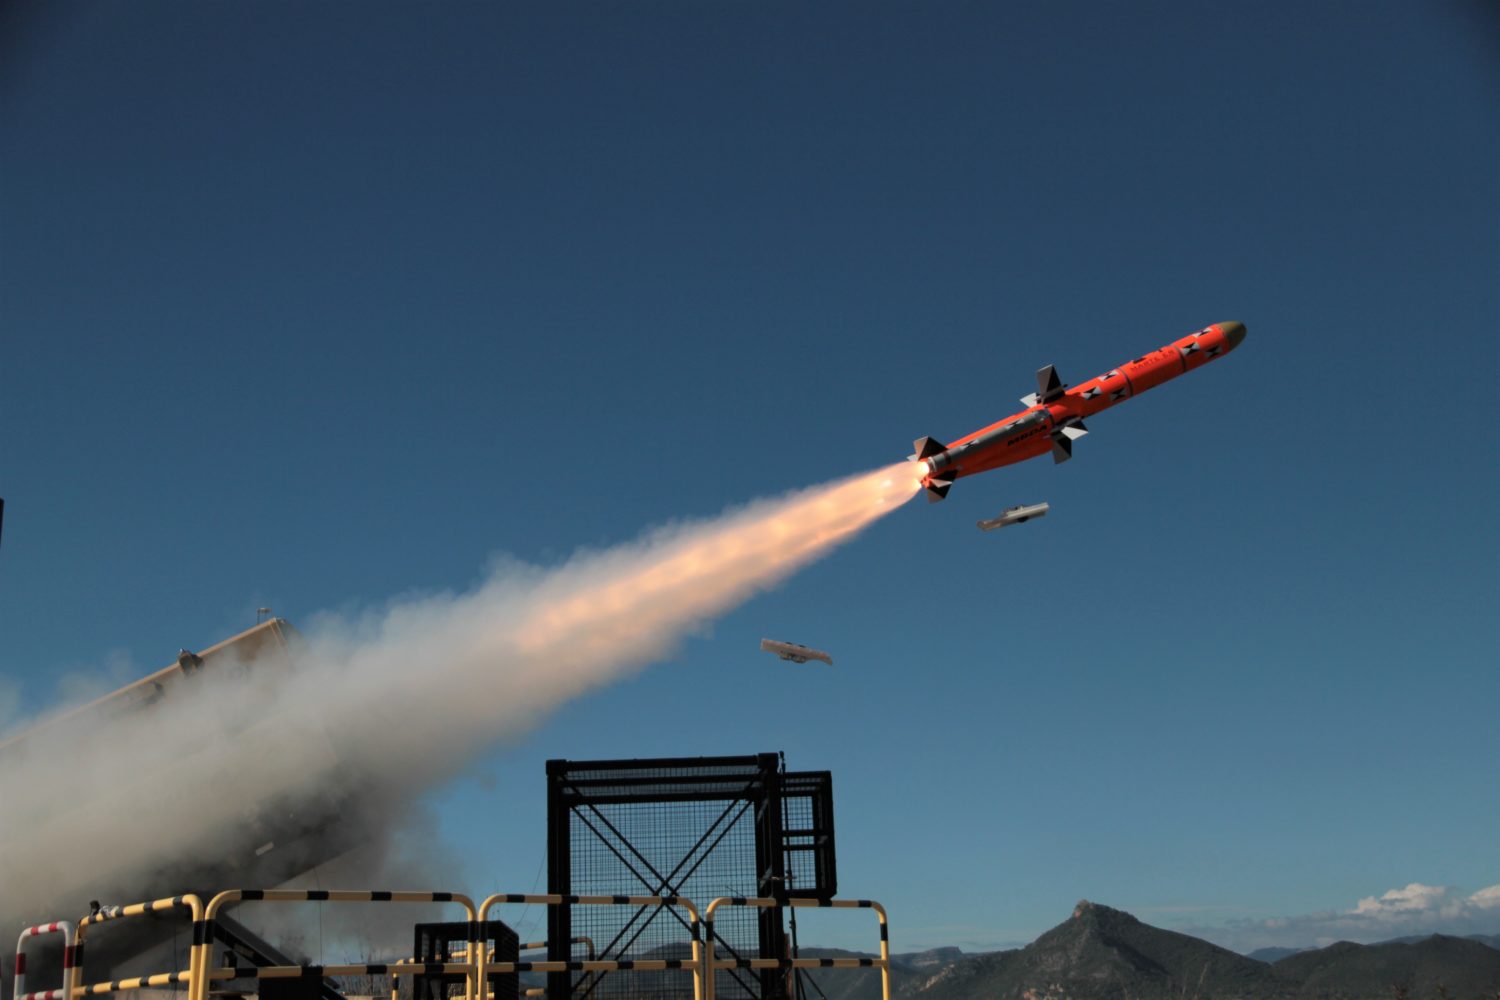 This firing confirmed the overall design and performance of the MBDA Marte-ER missile marking a critical milestone in its development path.